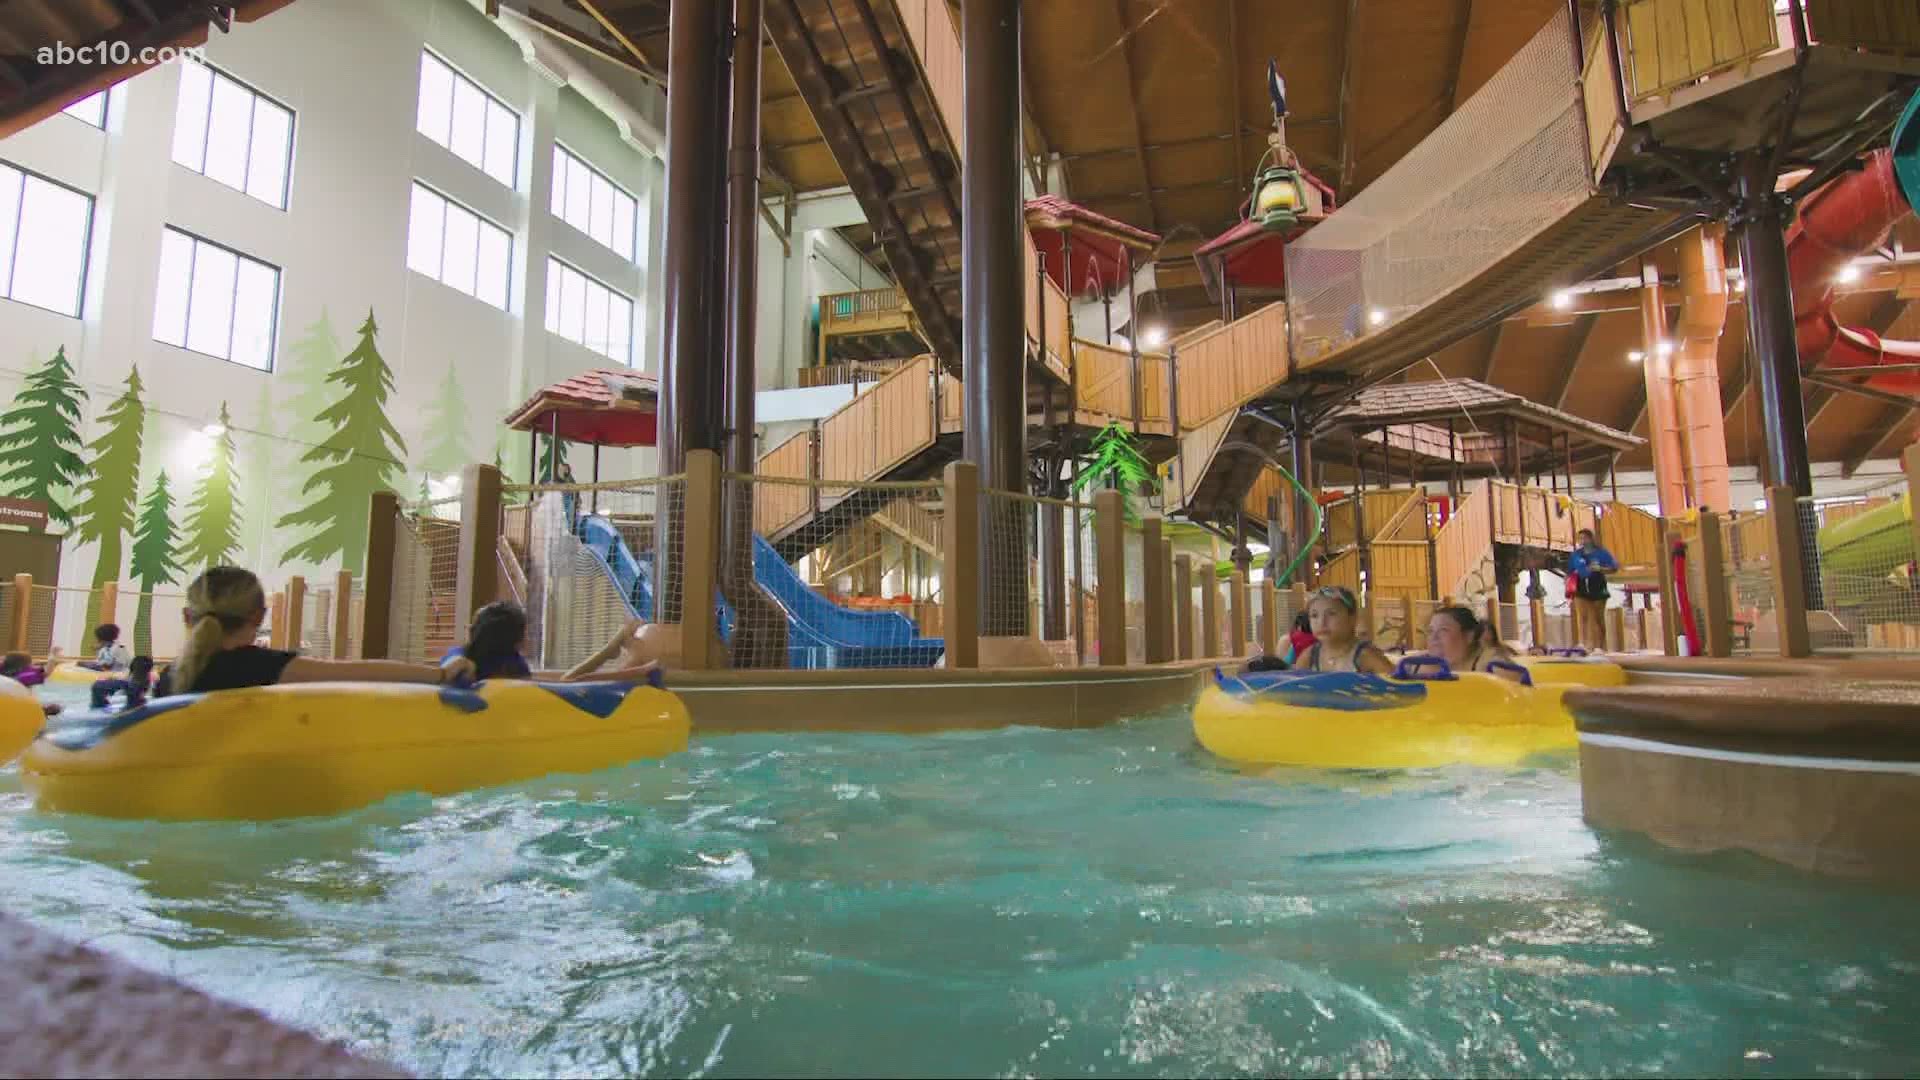 It's opening day at the Great Wolf Lodge, a resort with 500 rooms, an adventure park, an indoor water park and more.